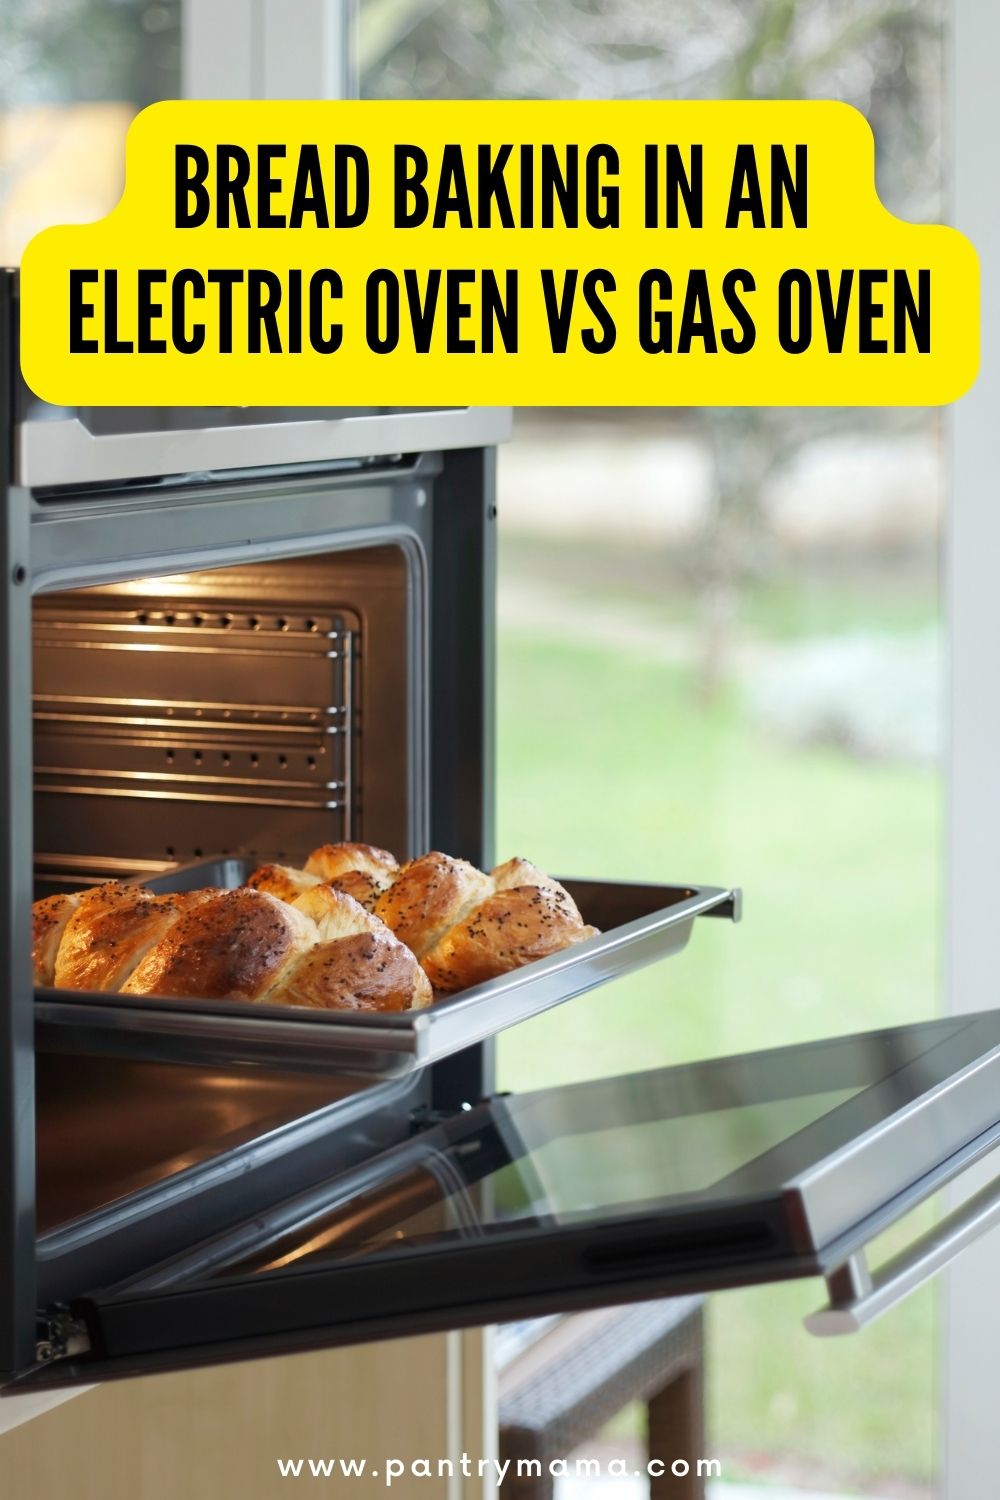 https://www.pantrymama.com/wp-content/uploads/2022/05/BREAD-BAKING-IN-AN-ELECTRIC-OVEN-VS-GAS-OVEN.jpg